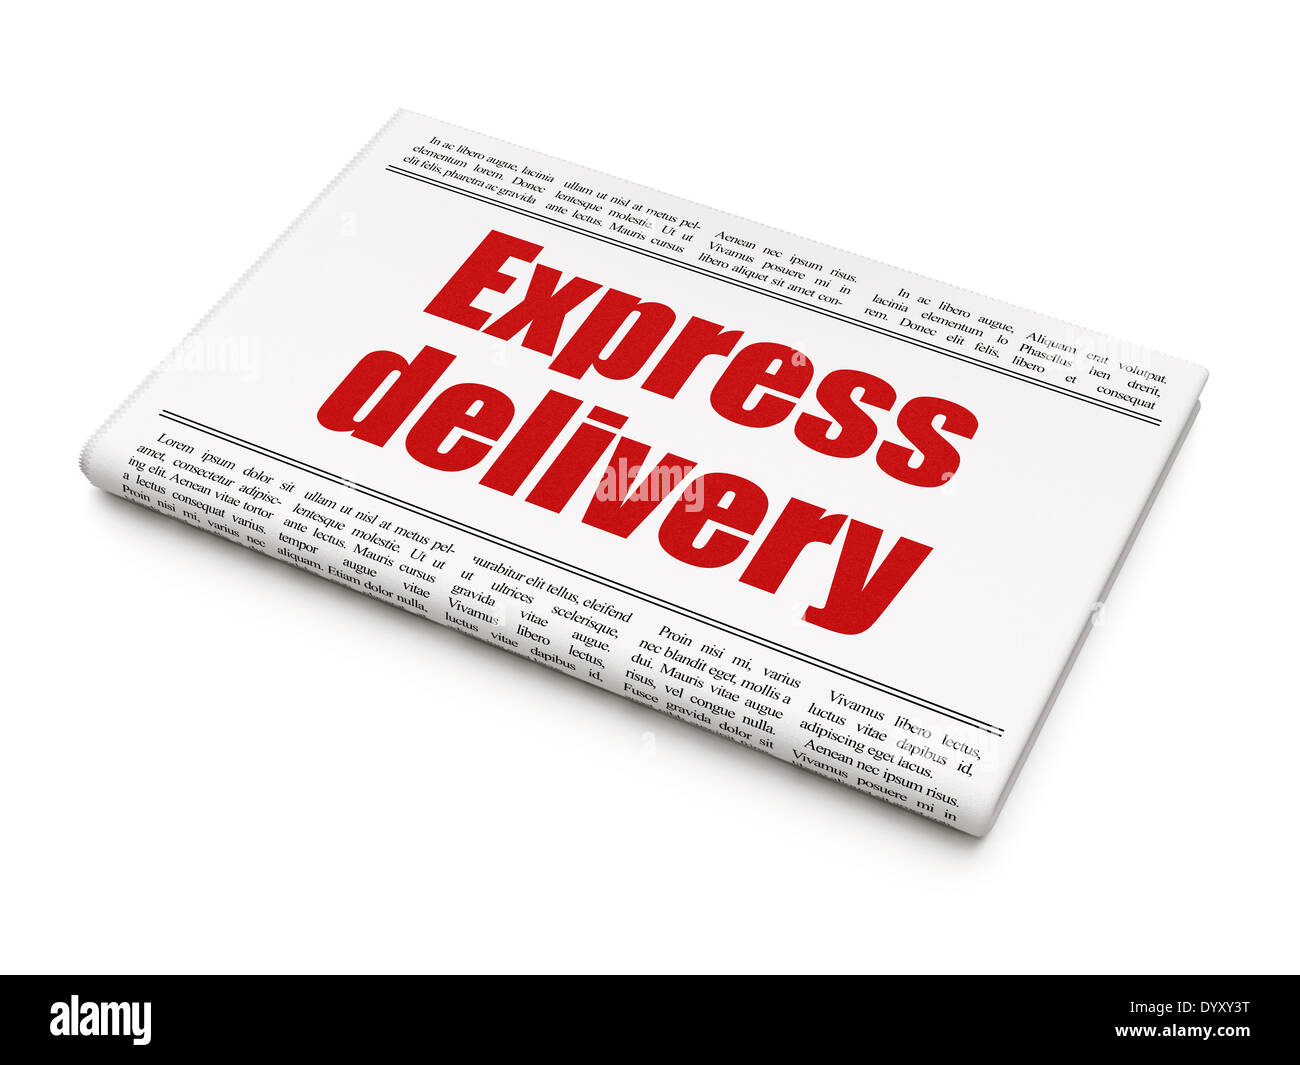 Business concept: newspaper headline Express Delivery Stock Photo